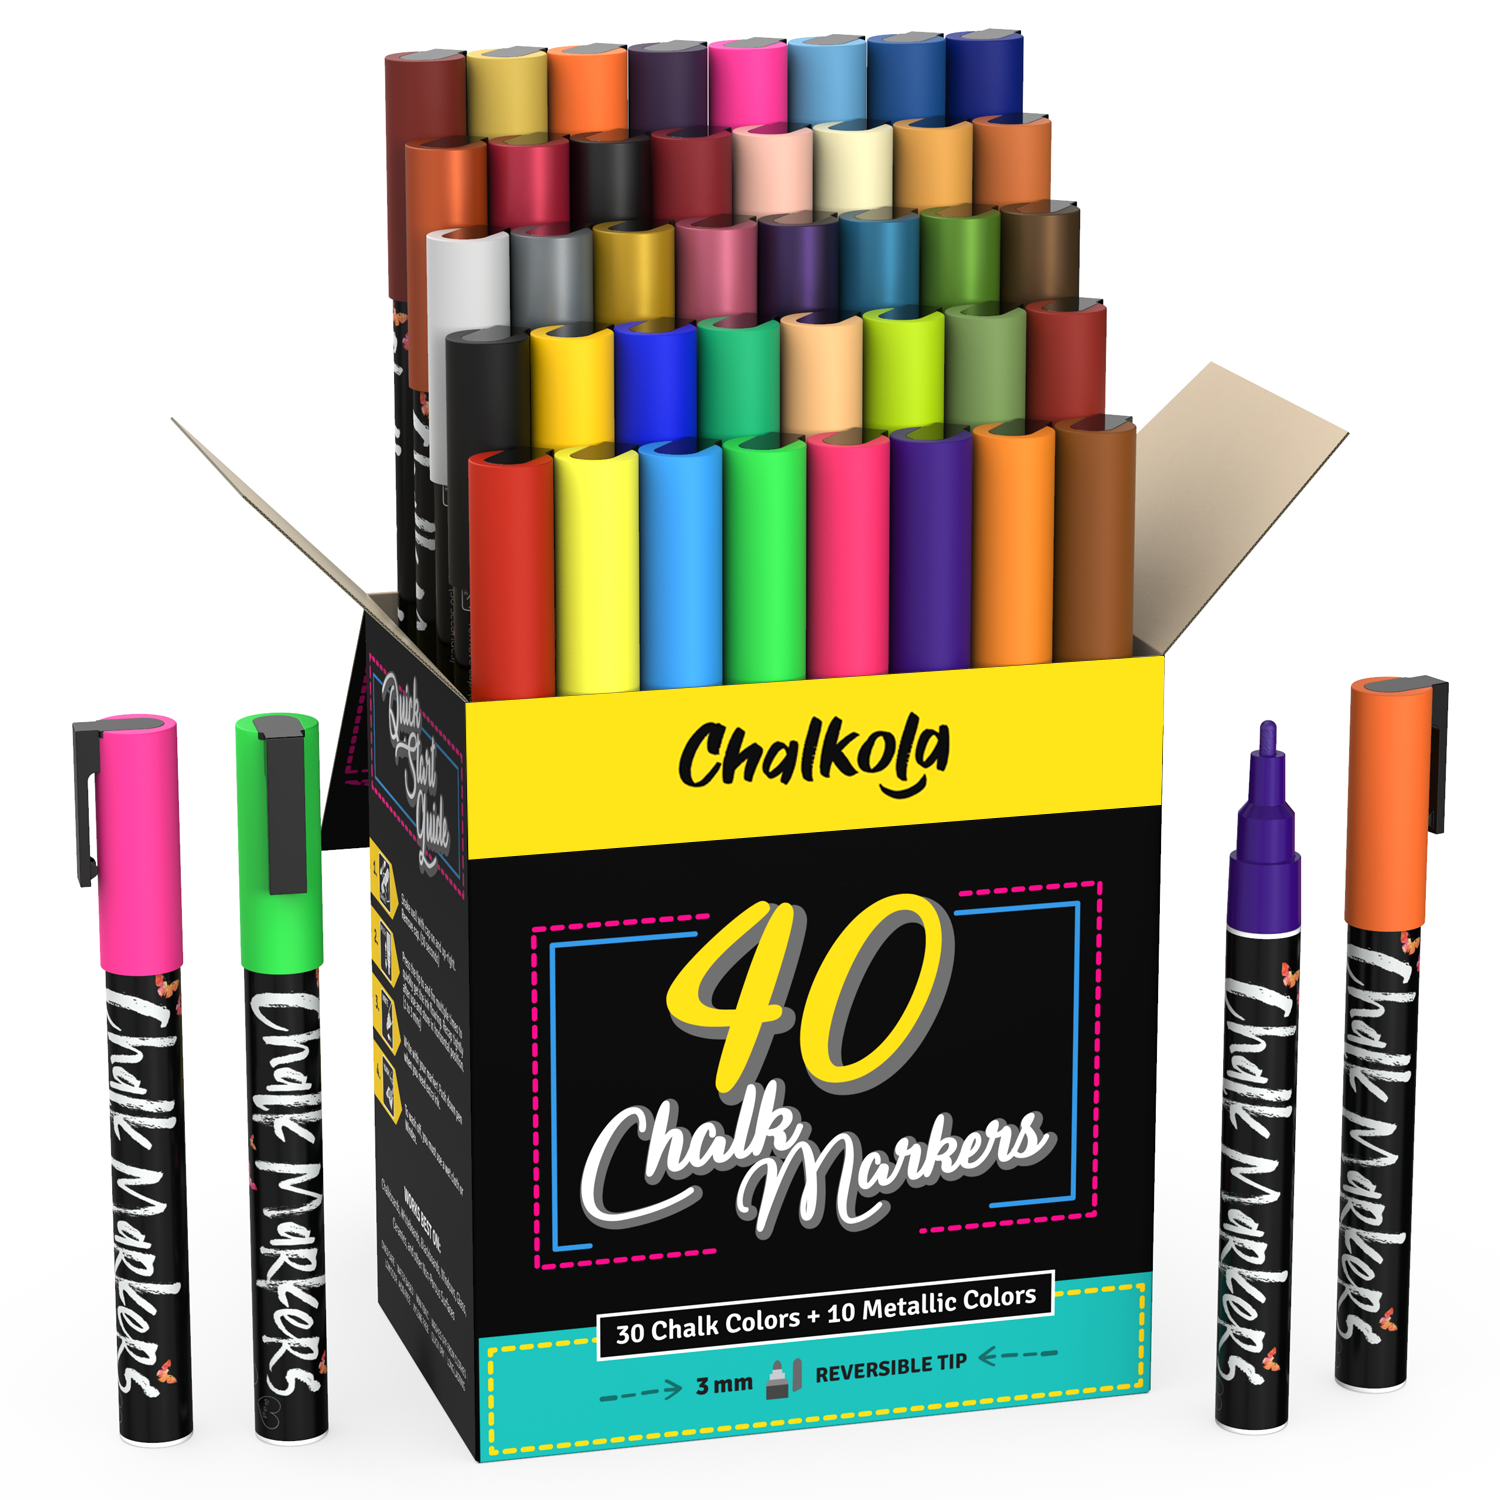 Chalkola Chalk Markers - Pack of 40 (Neon, Classic Metallic) Chalk Pens -  For